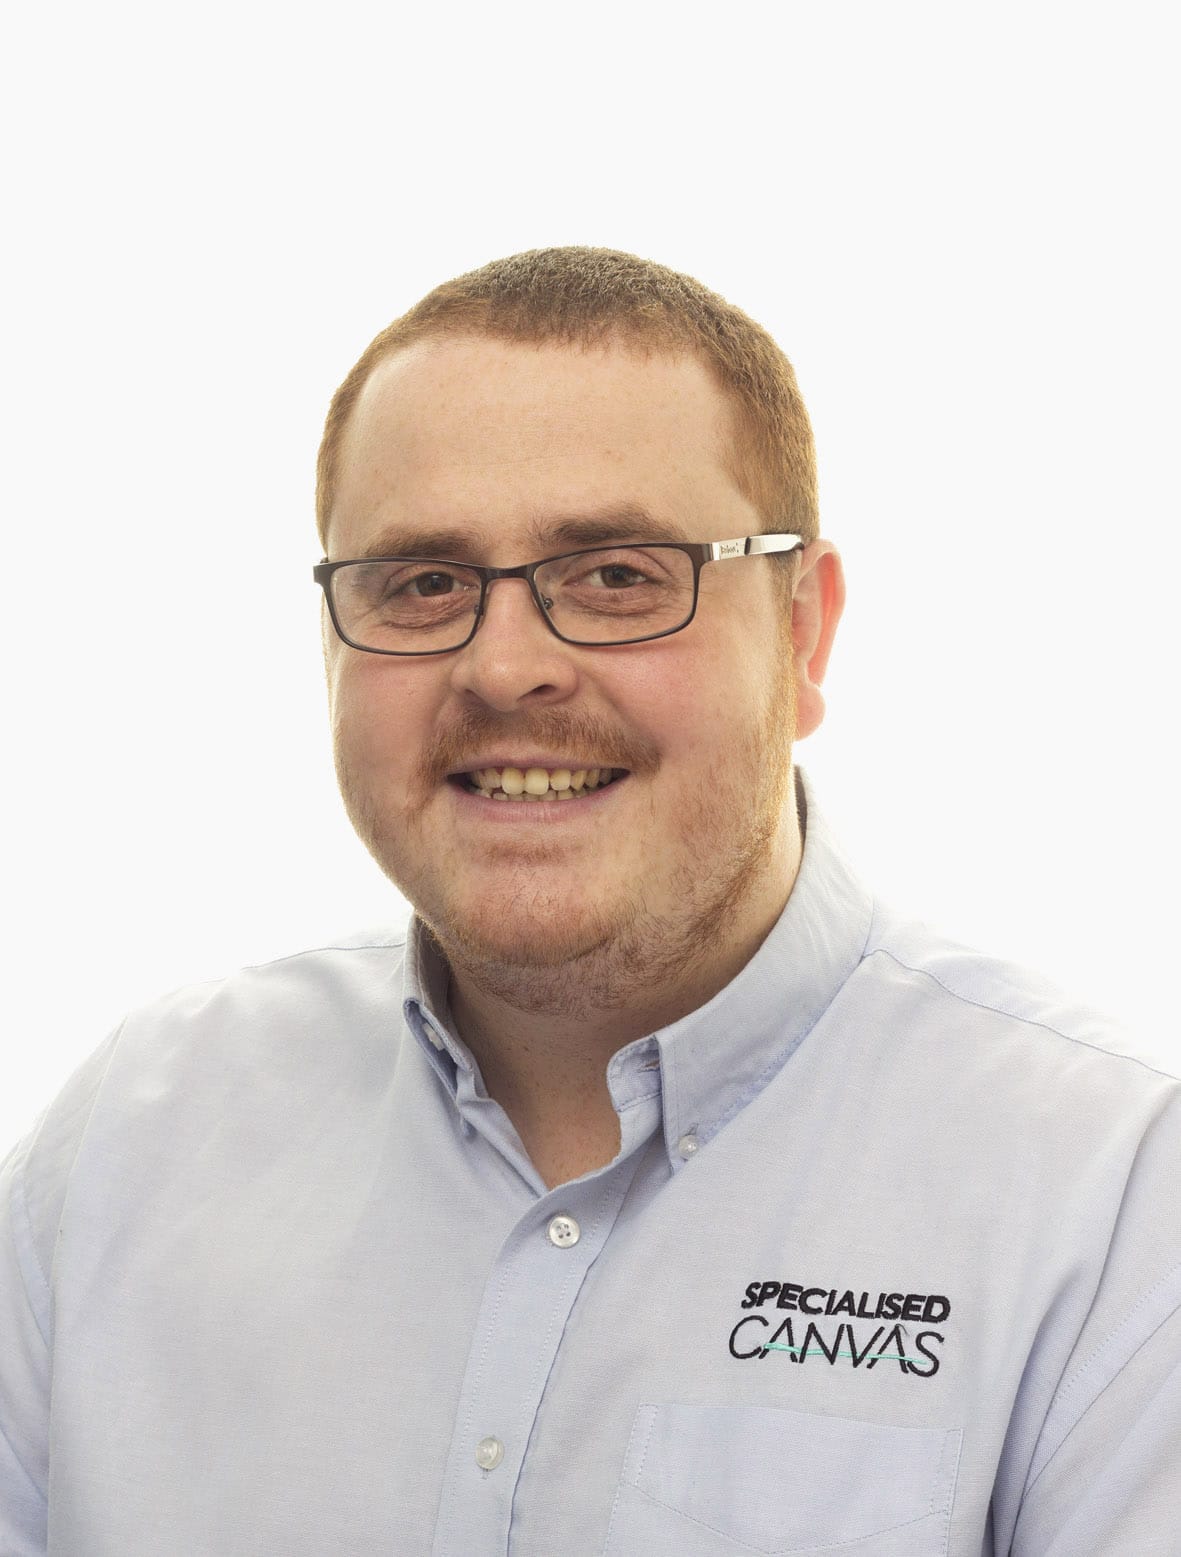 20 Questions with Sales Manager Andy Boden - SCS